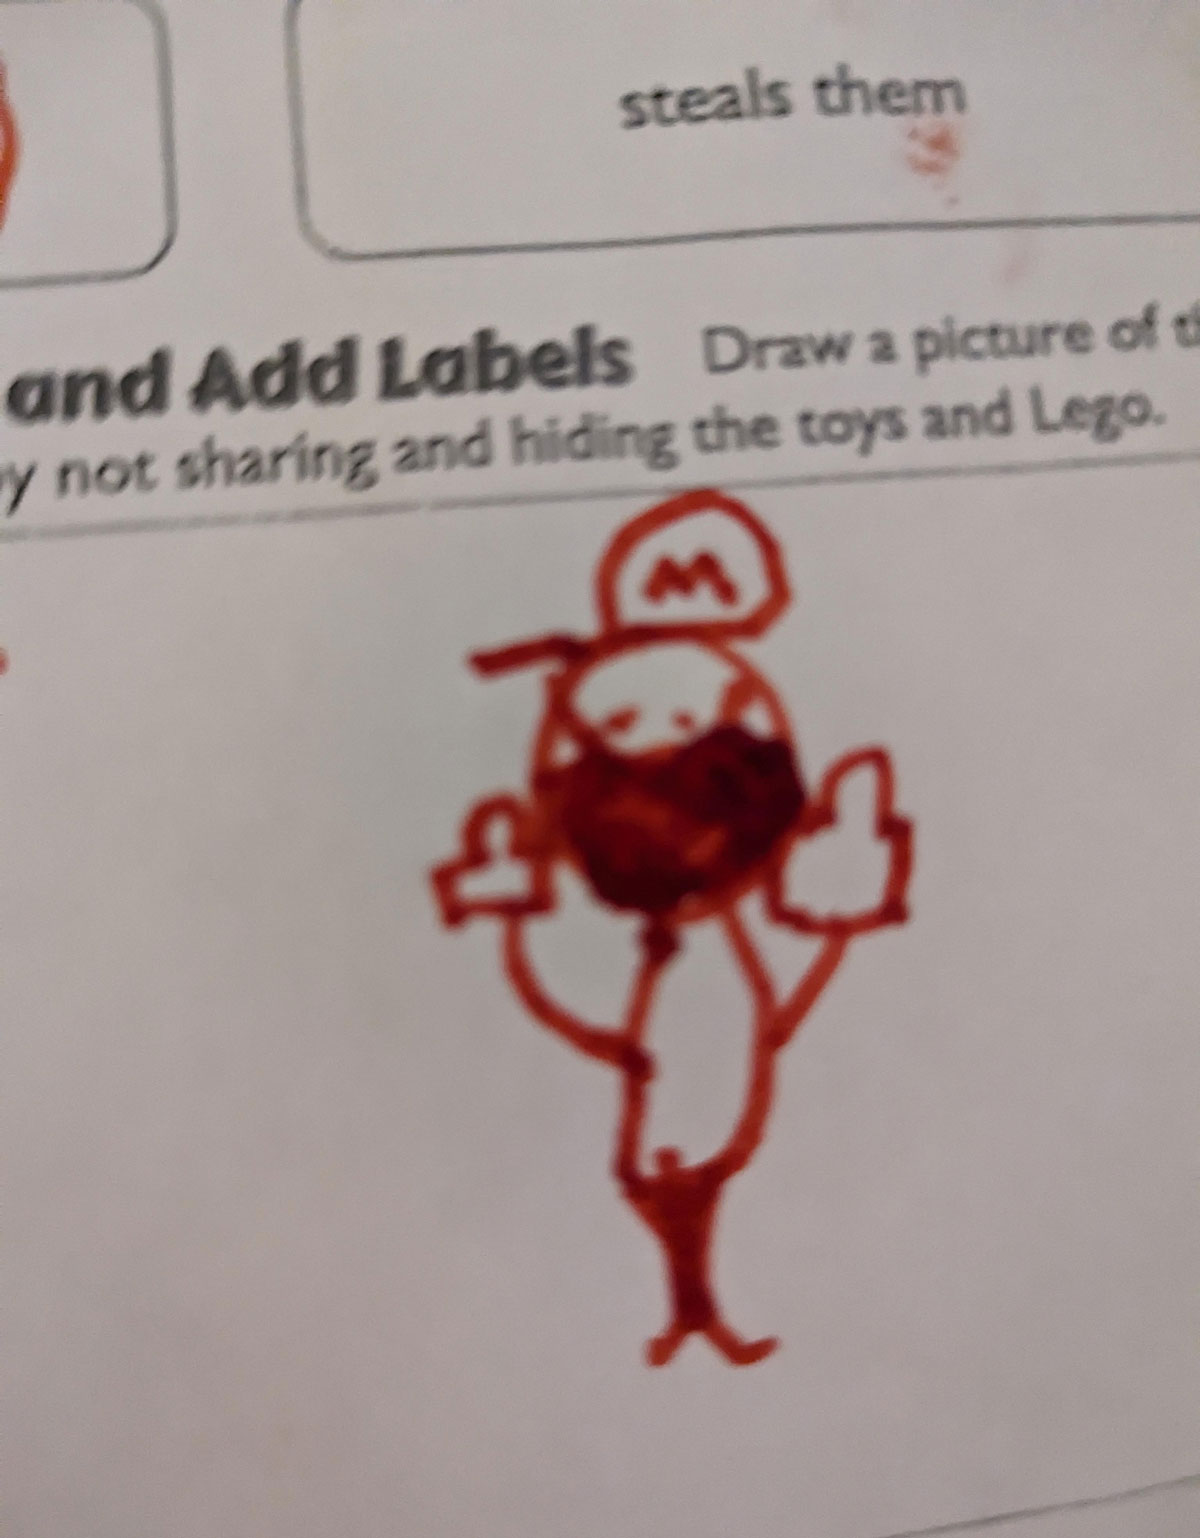 My son (6) drew Mario holding a drink in each hand. He didn't understand why we were laughing